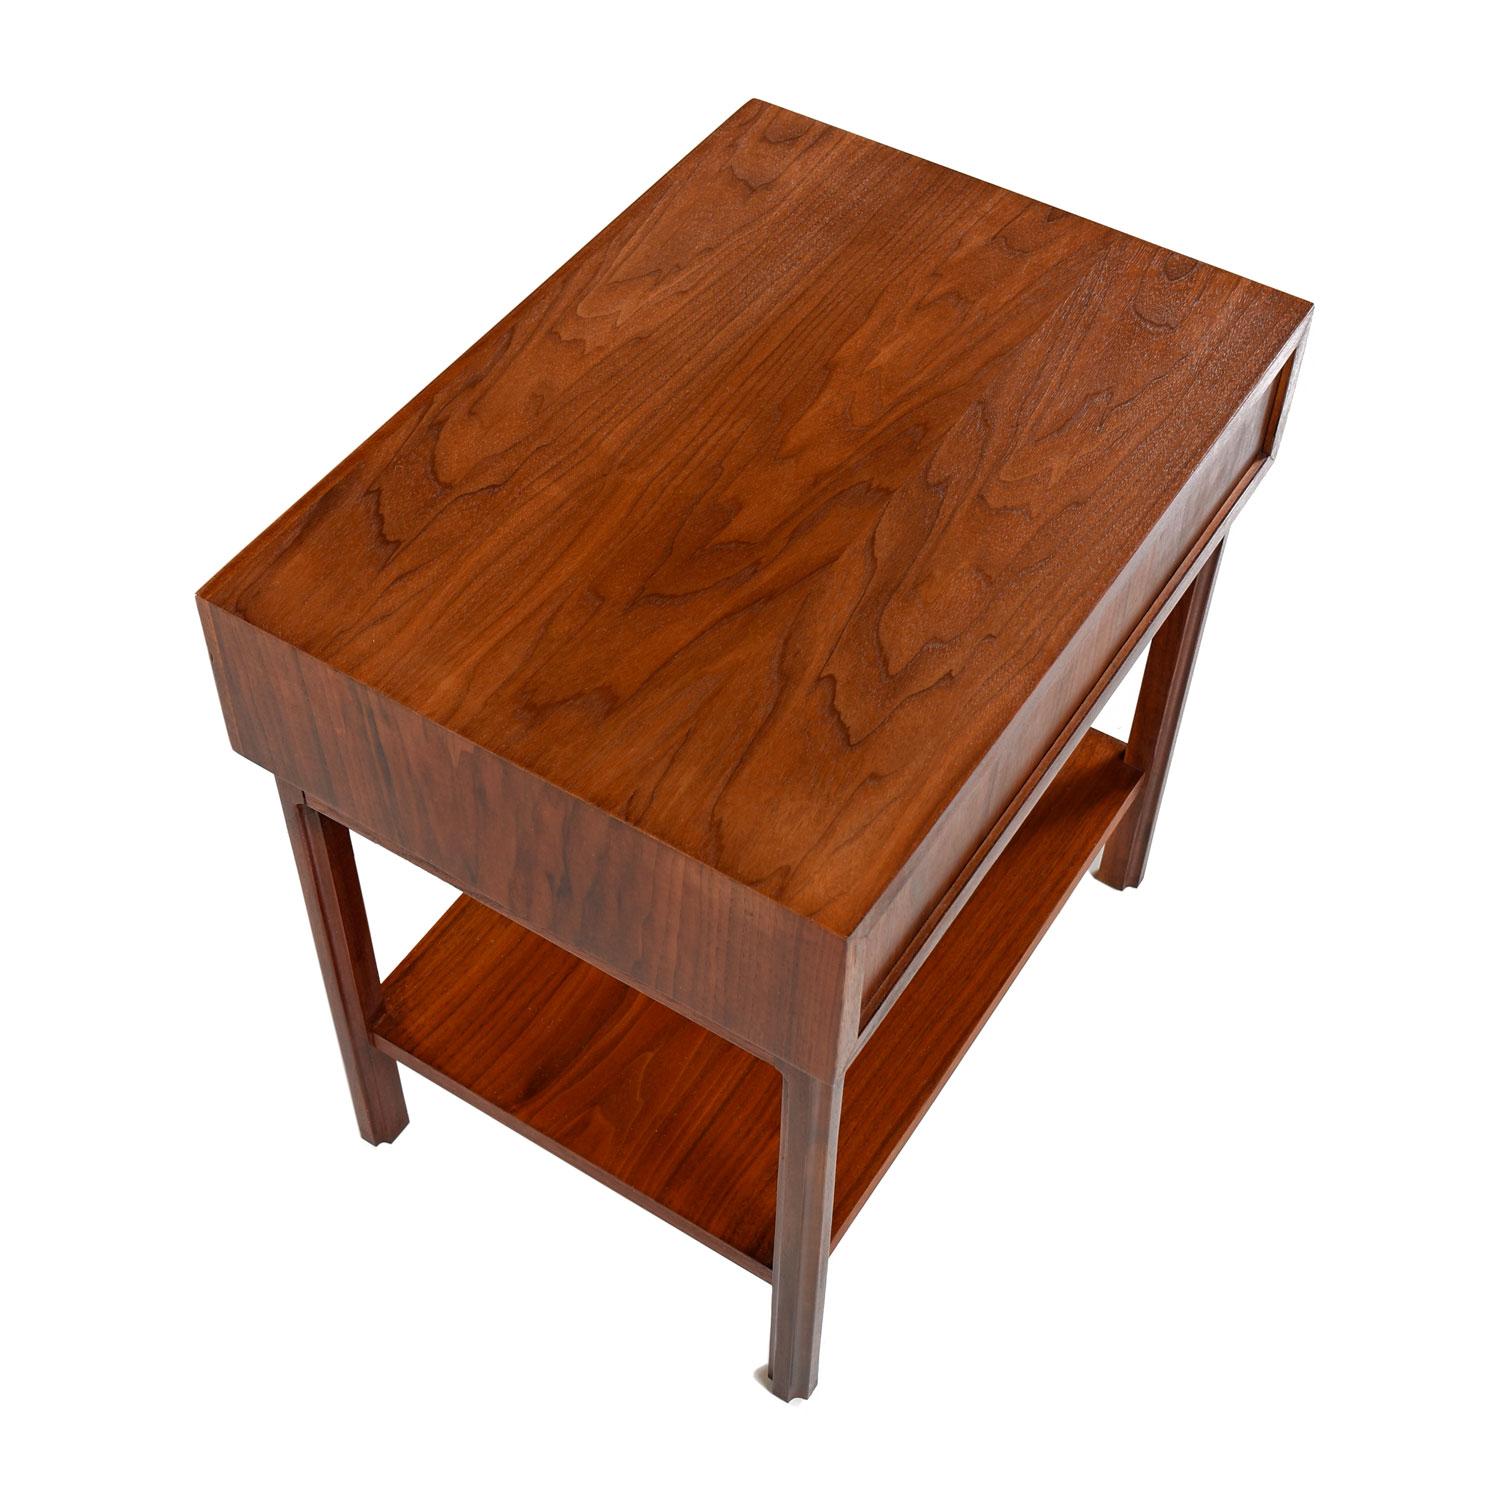 Mid-Century Modern walnut bedside table nightstand. Manufactured by Founders Furniture and designed by Jack Cartwright, circa 1960s. Sleek, elegant, Minimalist design made with the finest quality materials. Crafted with a mix of old growth, solid